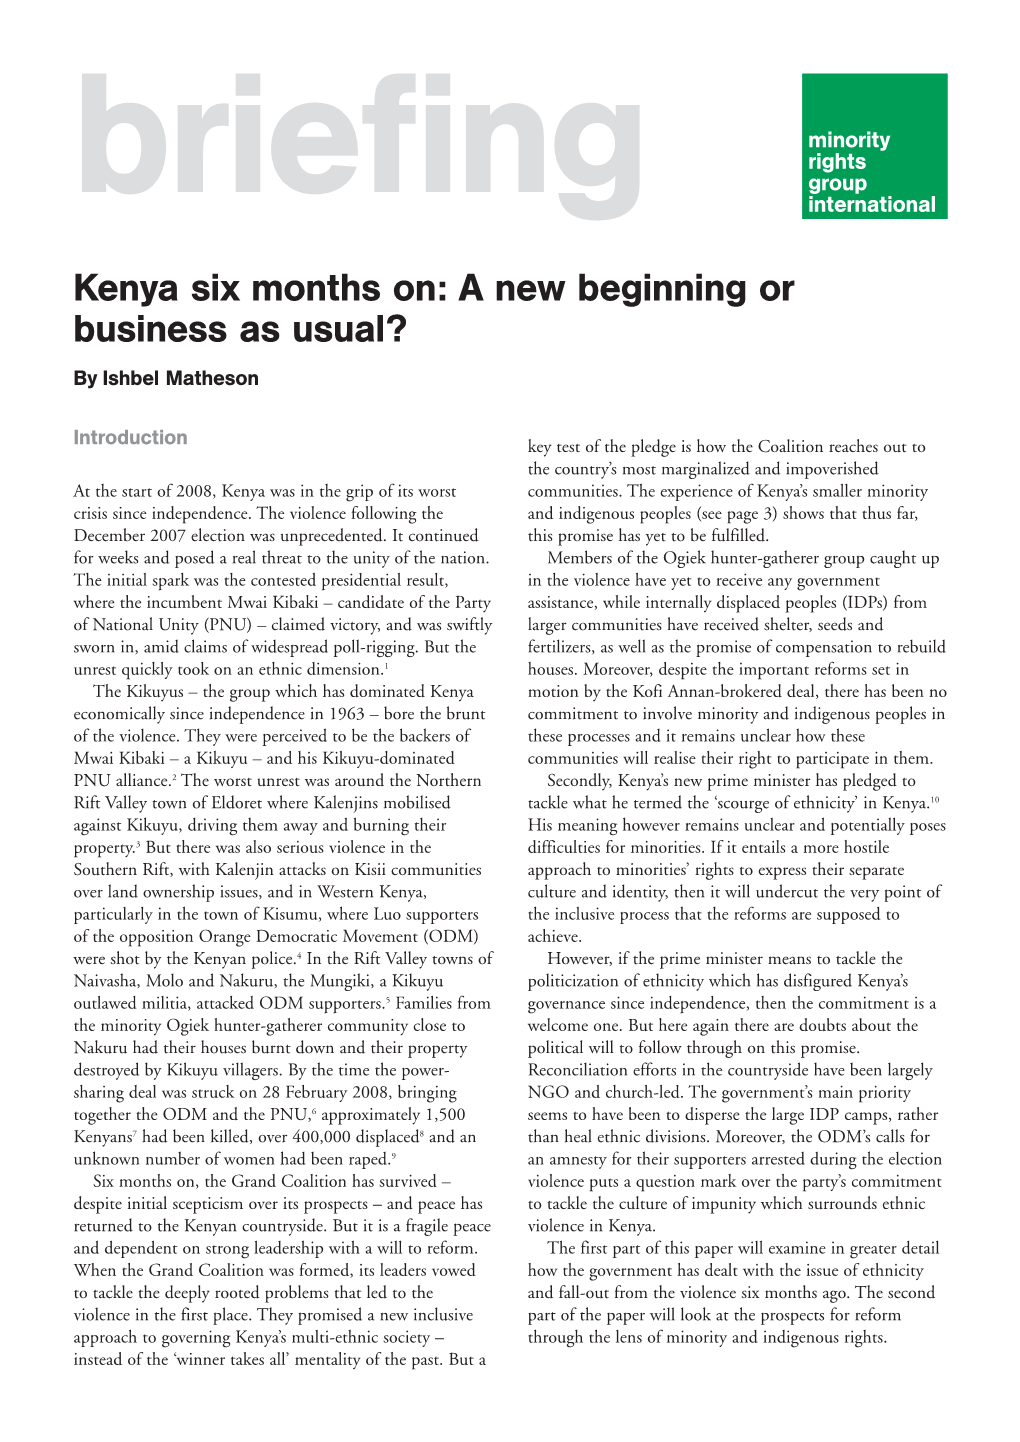 Kenya Six Months On: a New Beginning Or Business As Usual? by Ishbel Matheson